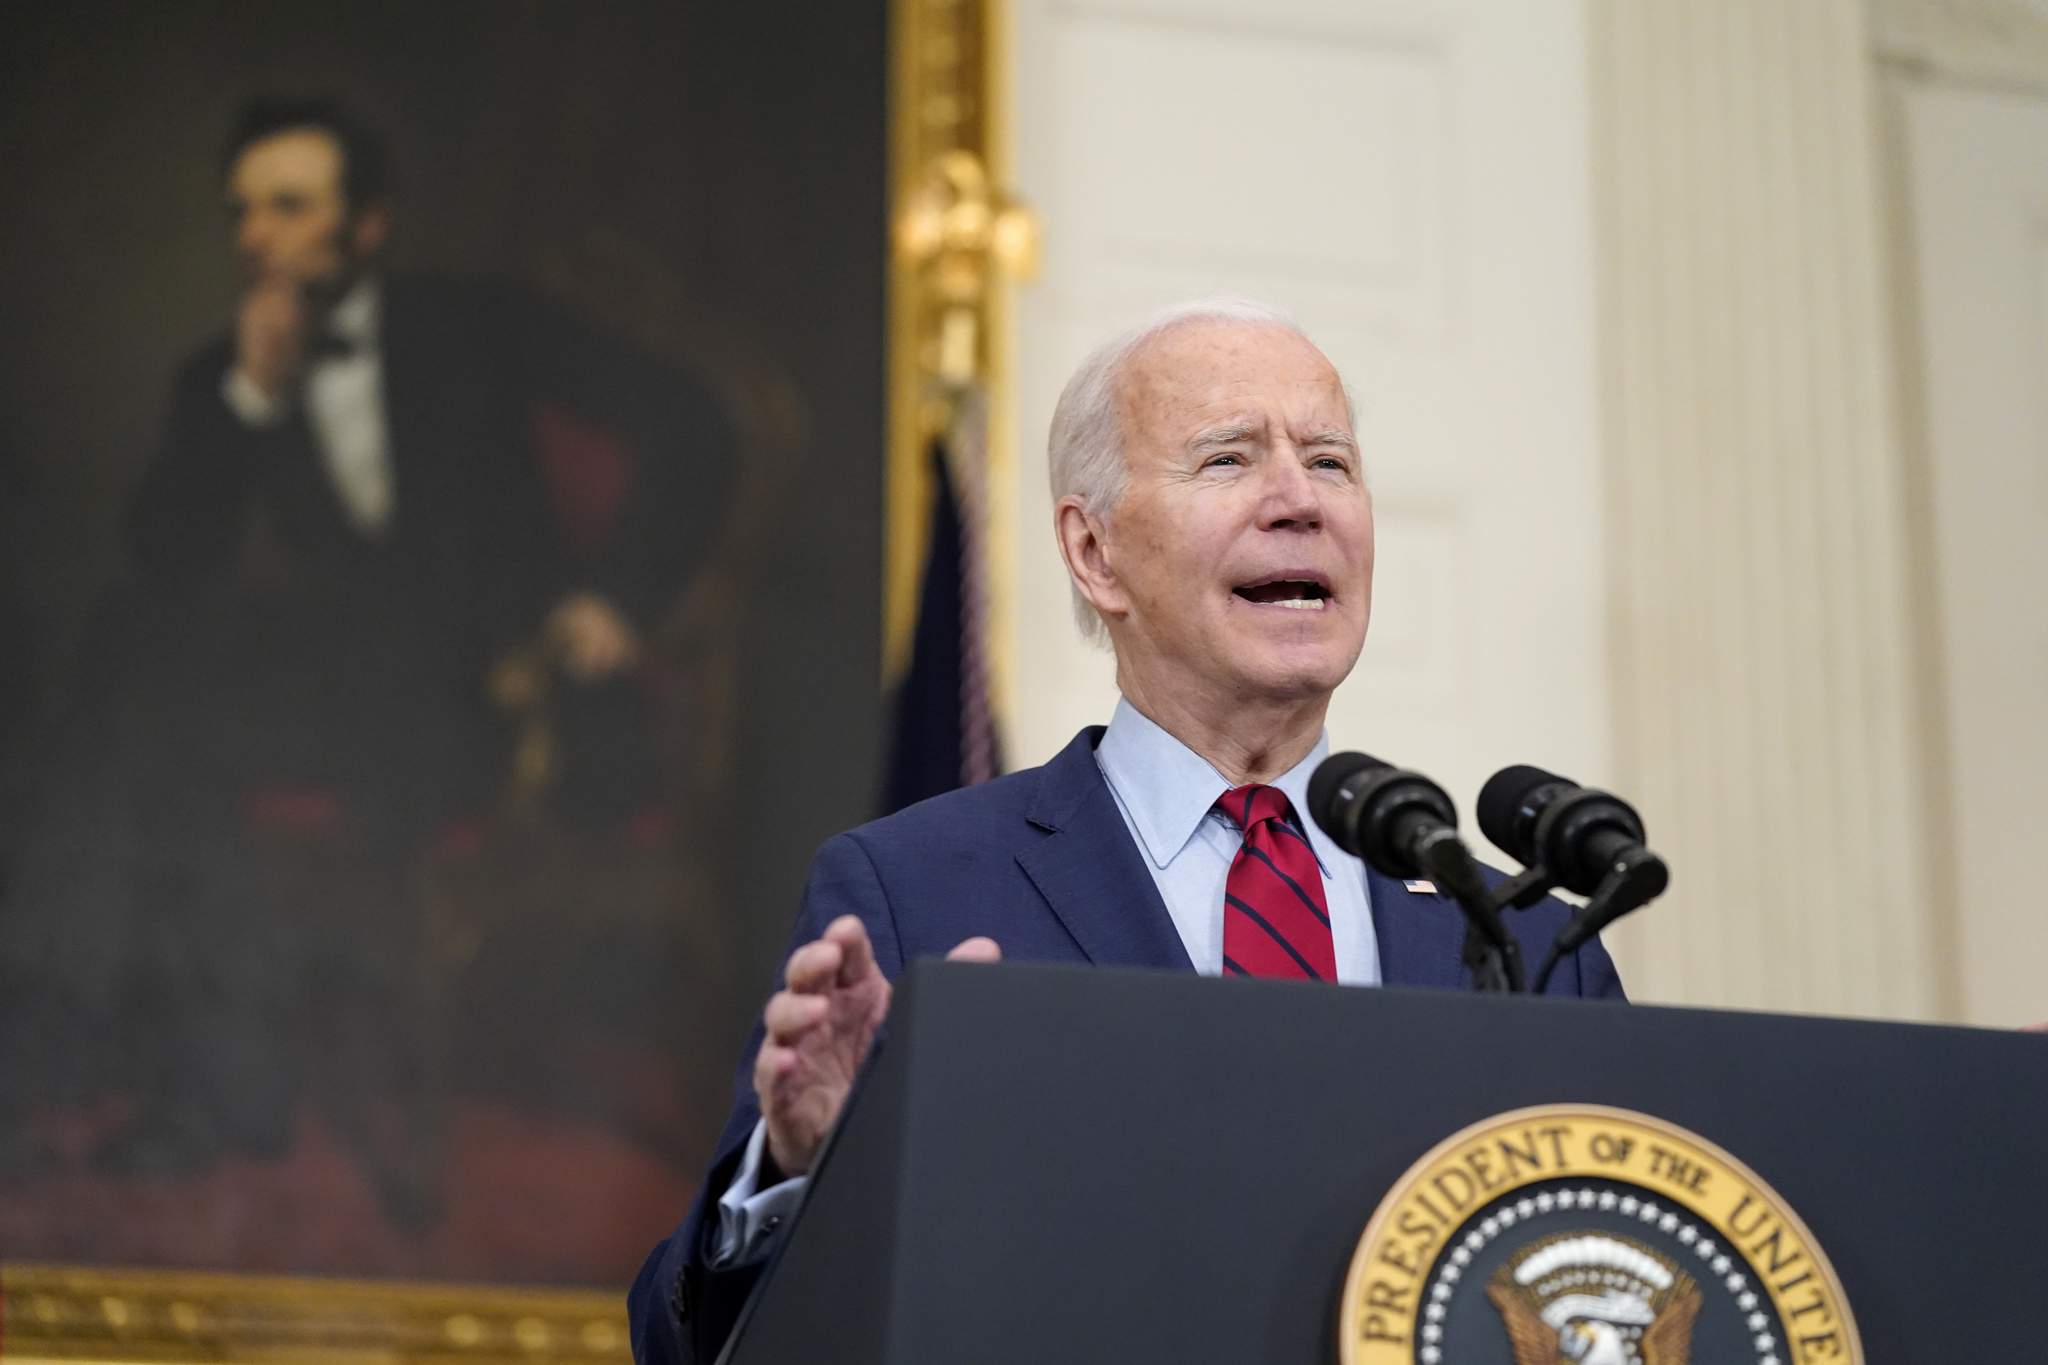 President Biden says ‘we have to act’ after Colorado mass shooting